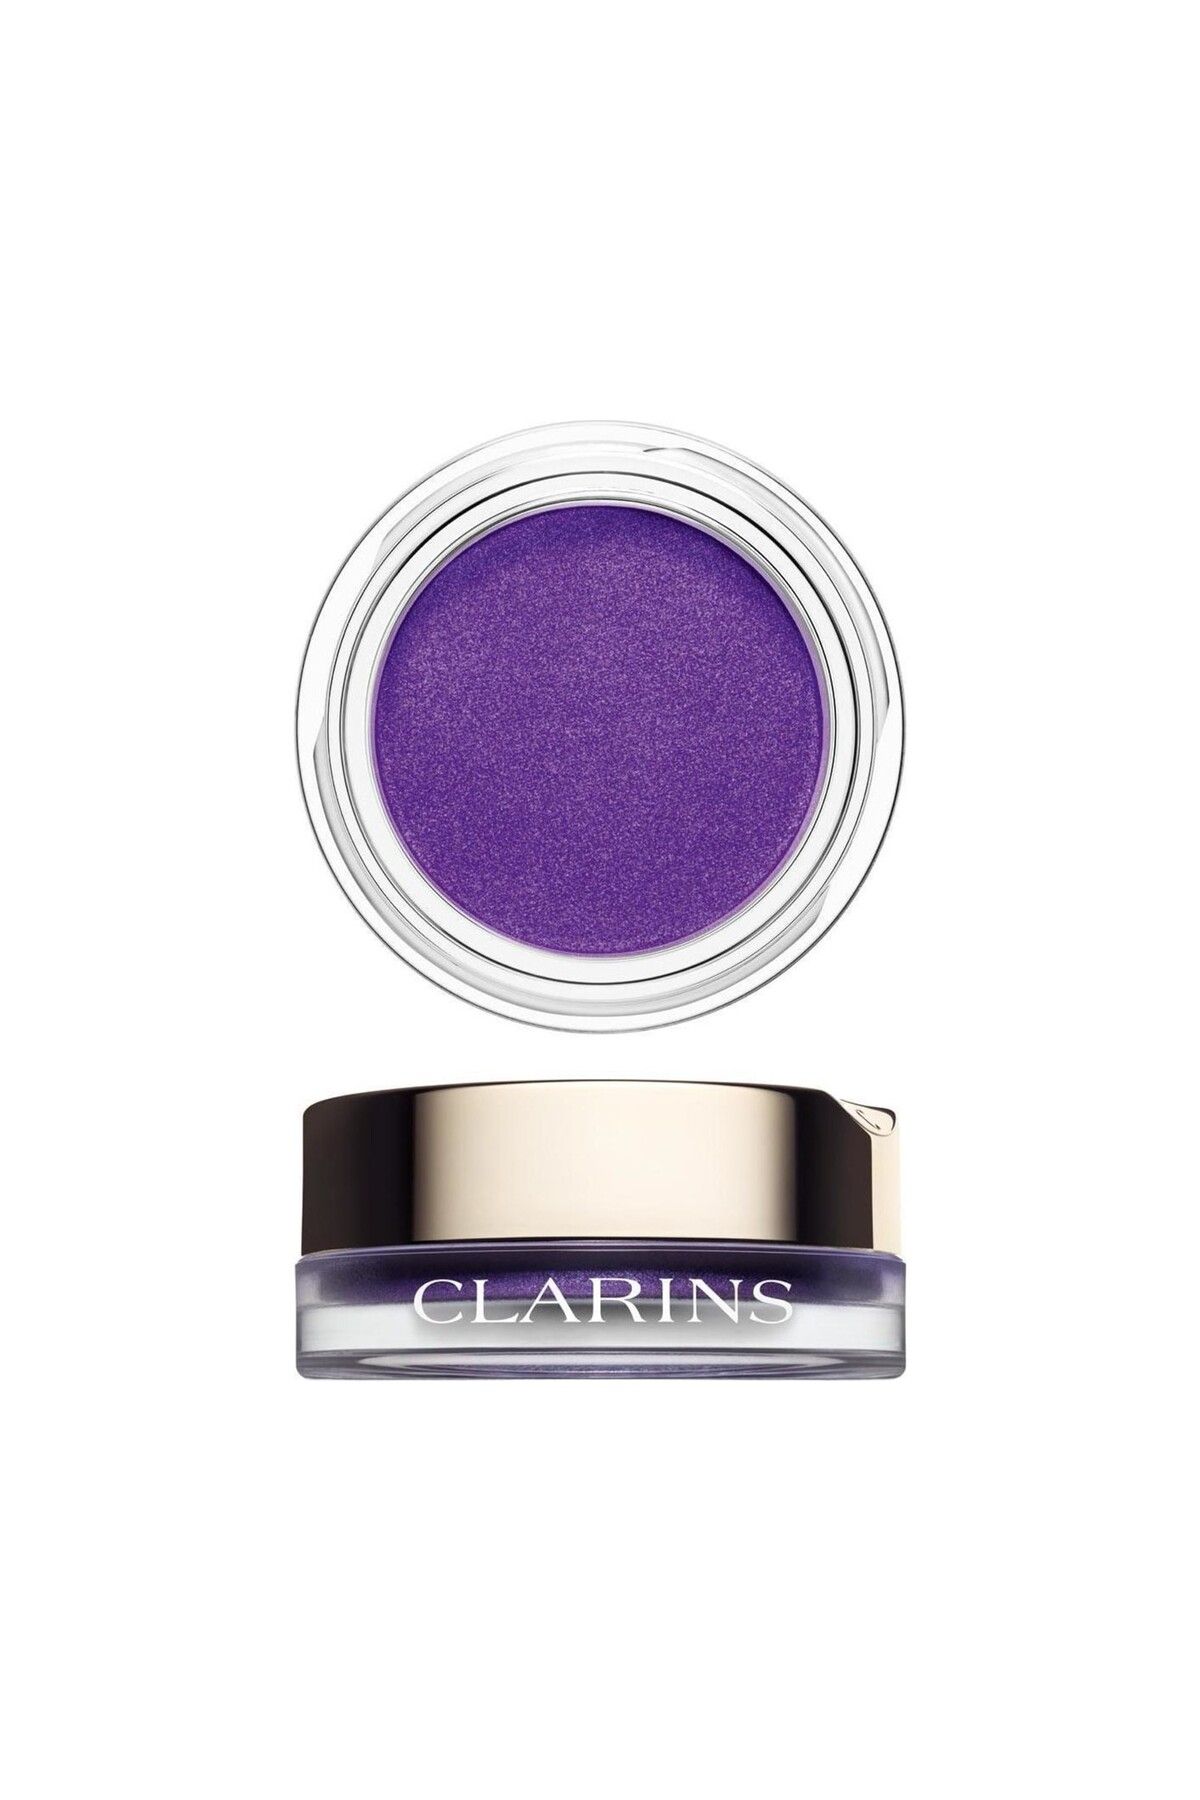 Clarins Ombre Matte Eye Shadow 20 Ultra Violet